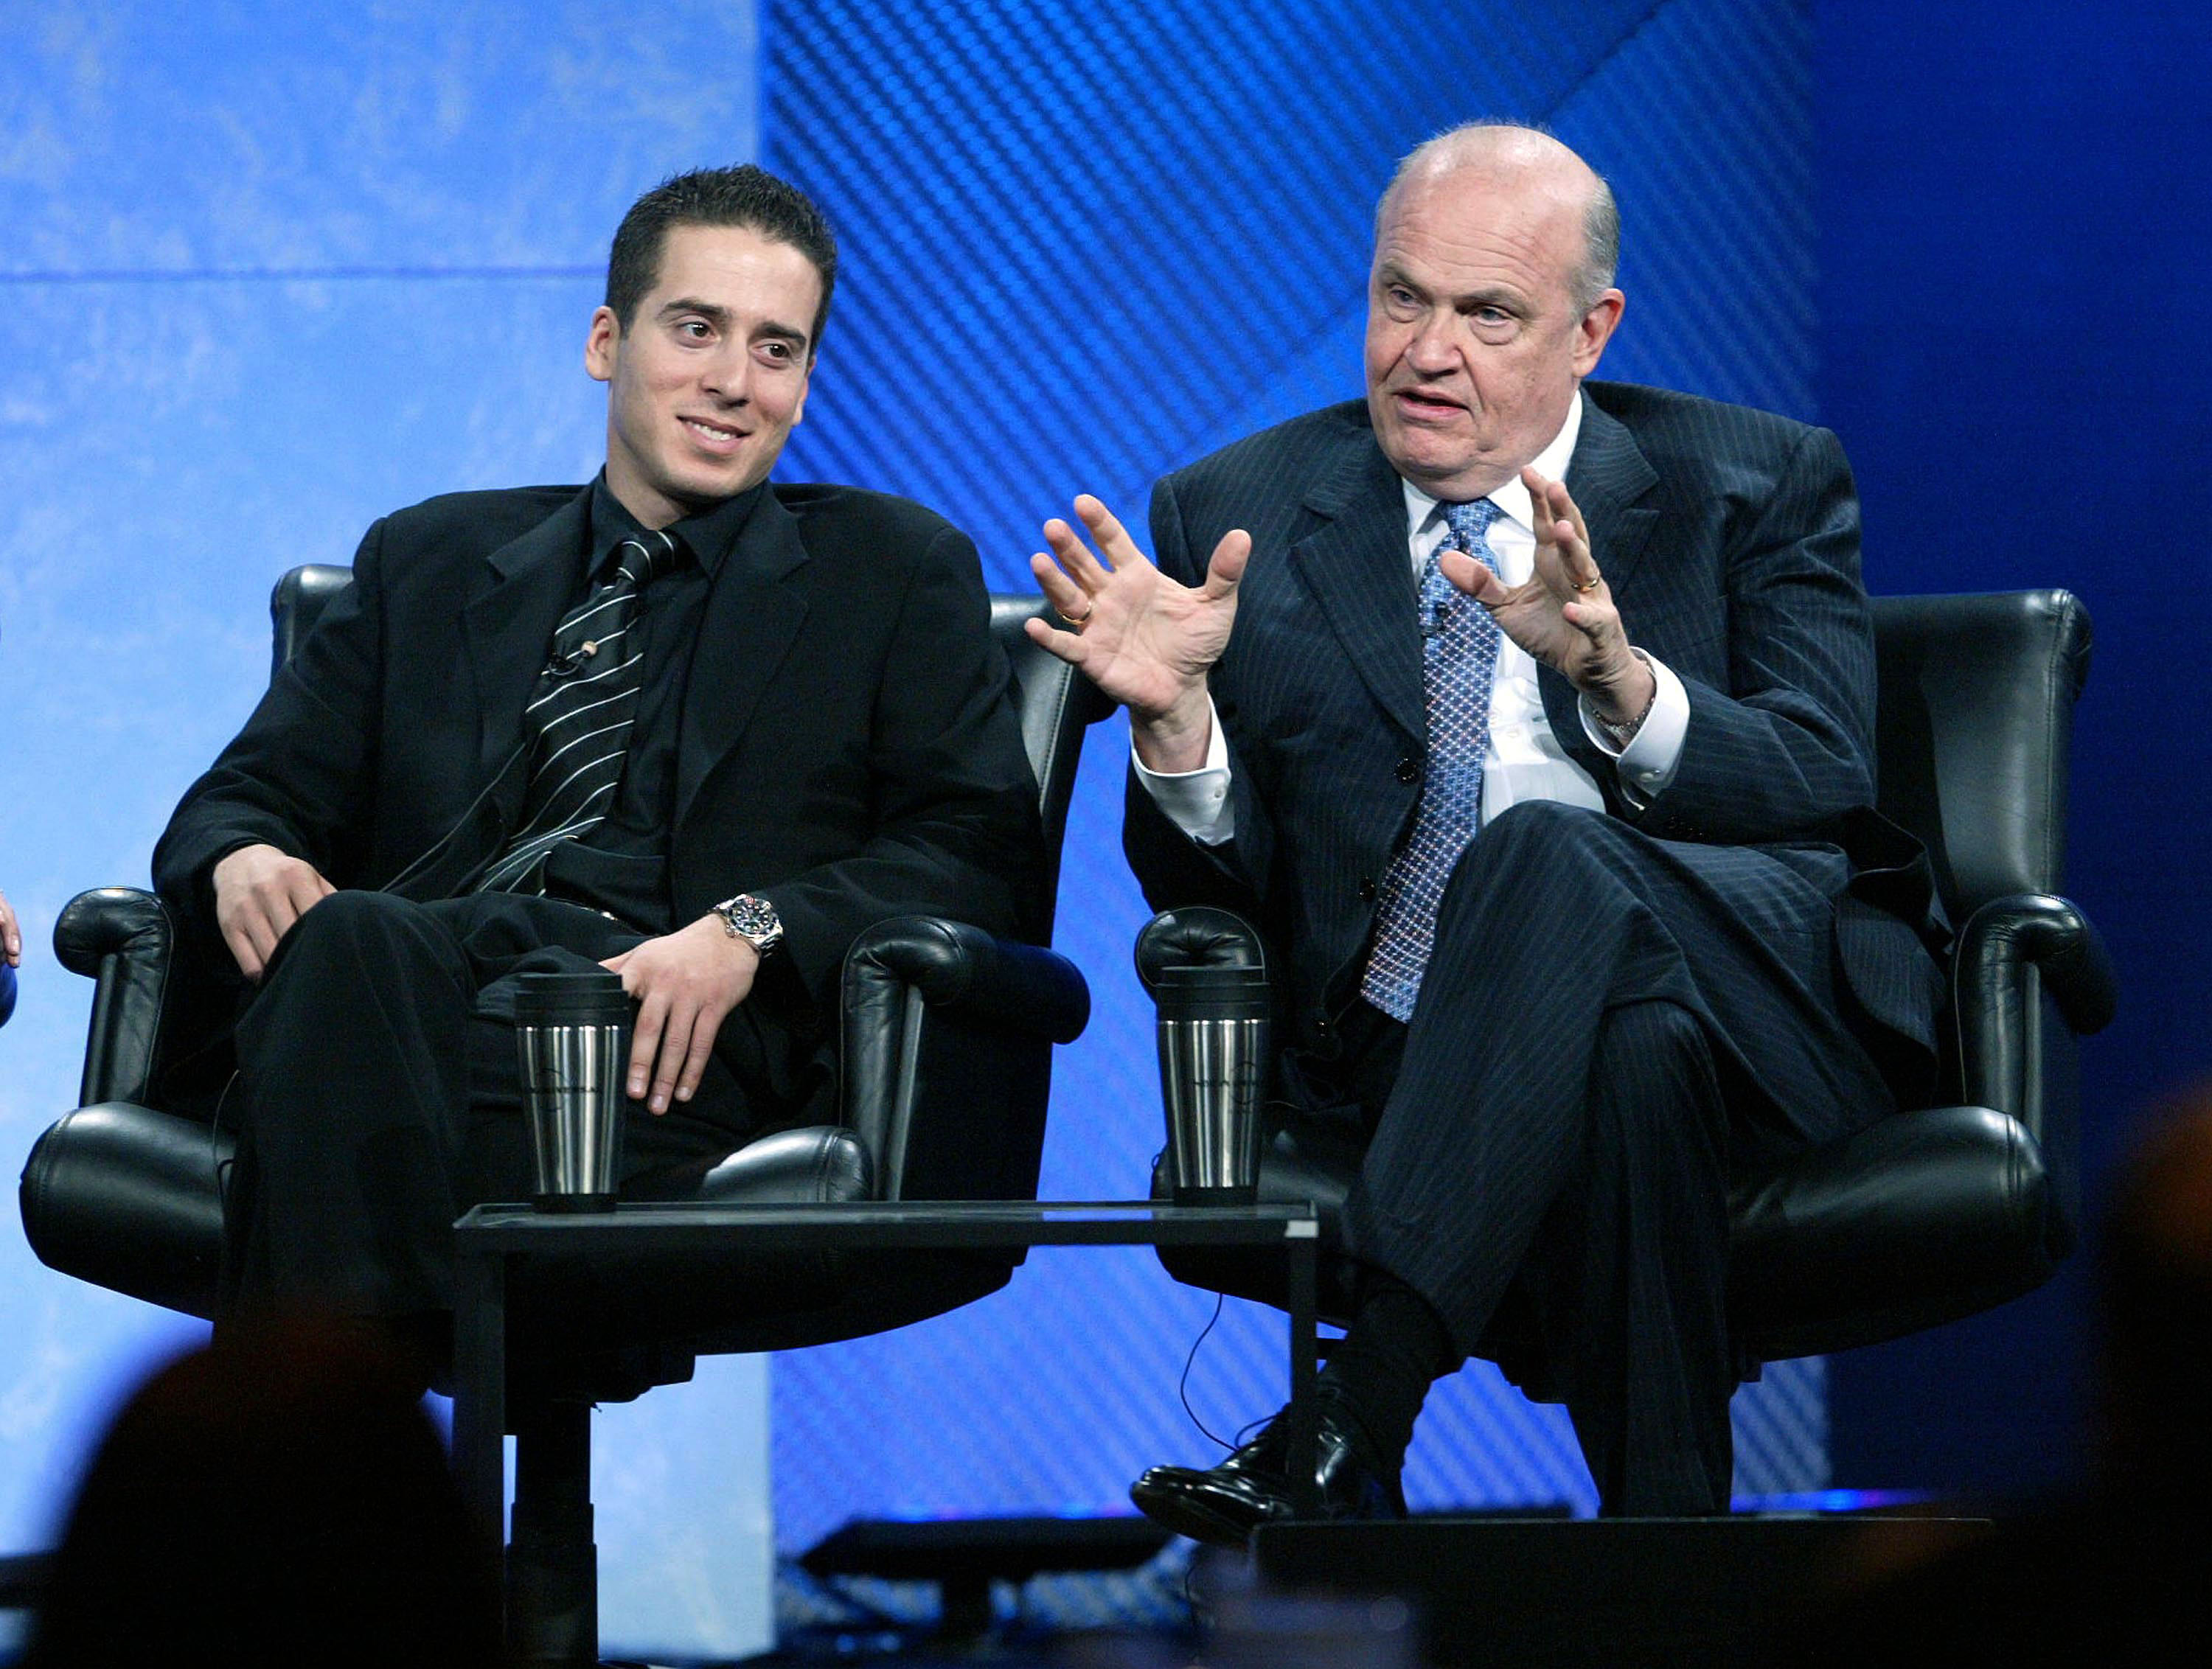 Actors Kirk Acevedo and Fred Dalton Thompson of the television show  speak during the NBC 2005 Television Critics Winter Press Tour at the Hilton Universal Hotel in Universal City, California. (Getty)